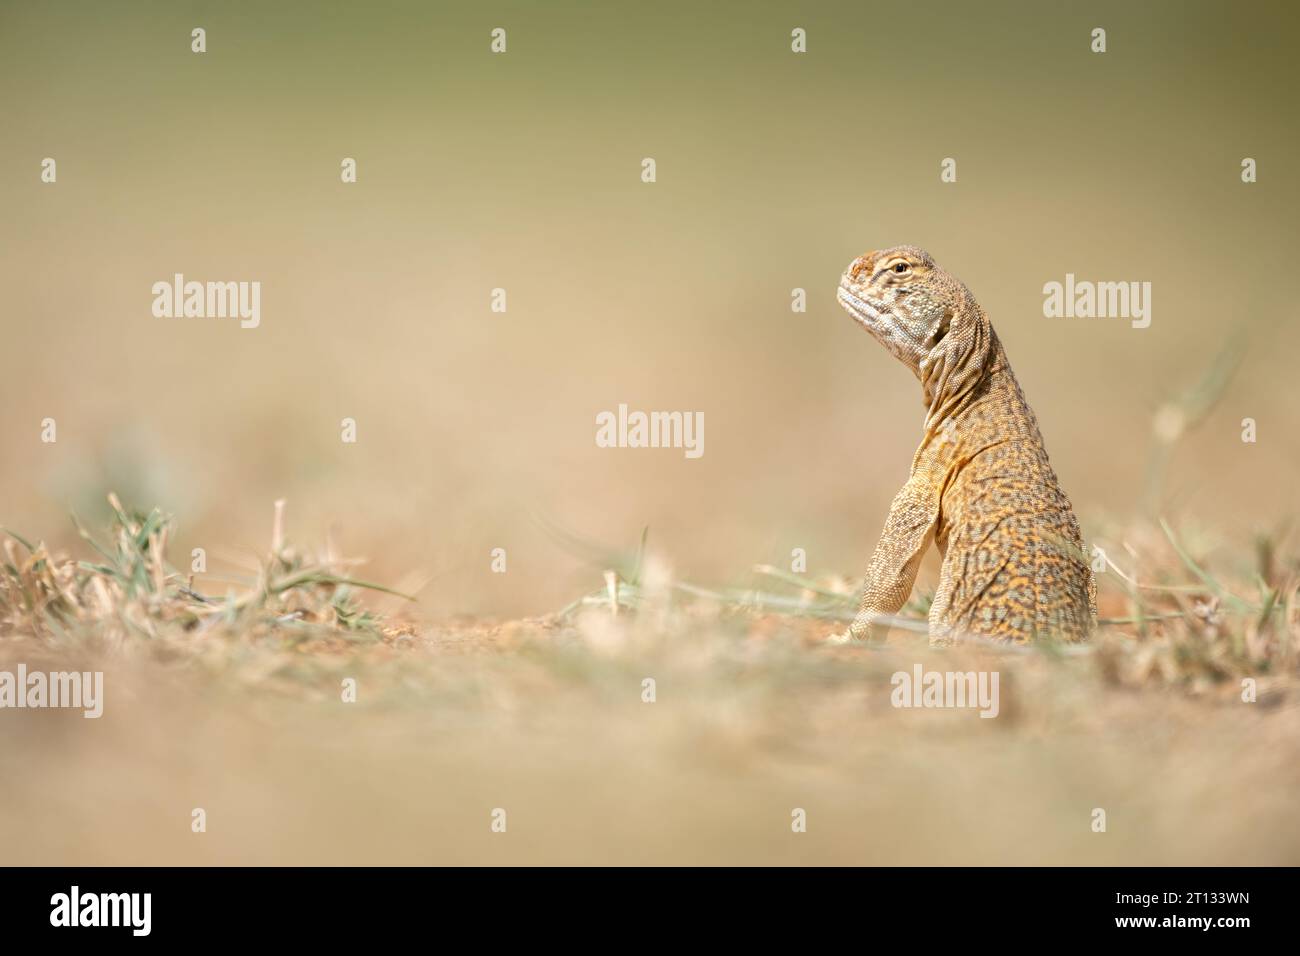 Portrait of a Hardwicke's spiny-tailed lizard or the Indian spiny-tailed lizard from Thar Desert, Rajasthan Stock Photo